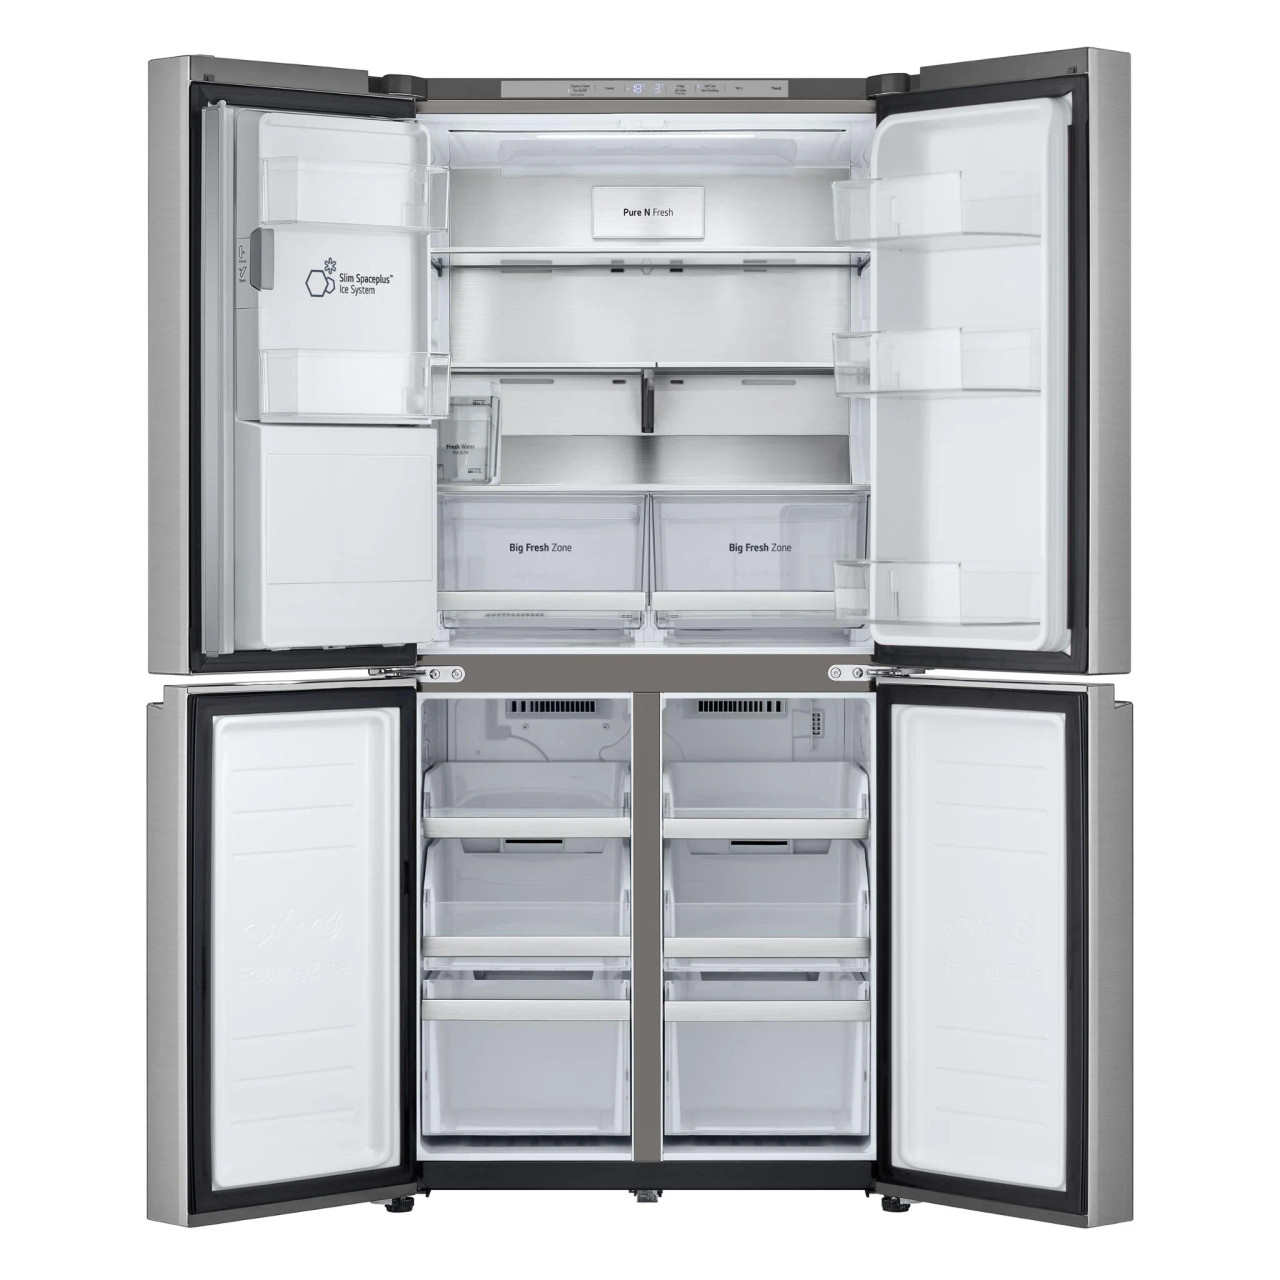 GF-LN500PL - 508L Slim French Door Fridge with Non-Plumbed Ice & Water Dispenser - Stainless Finish